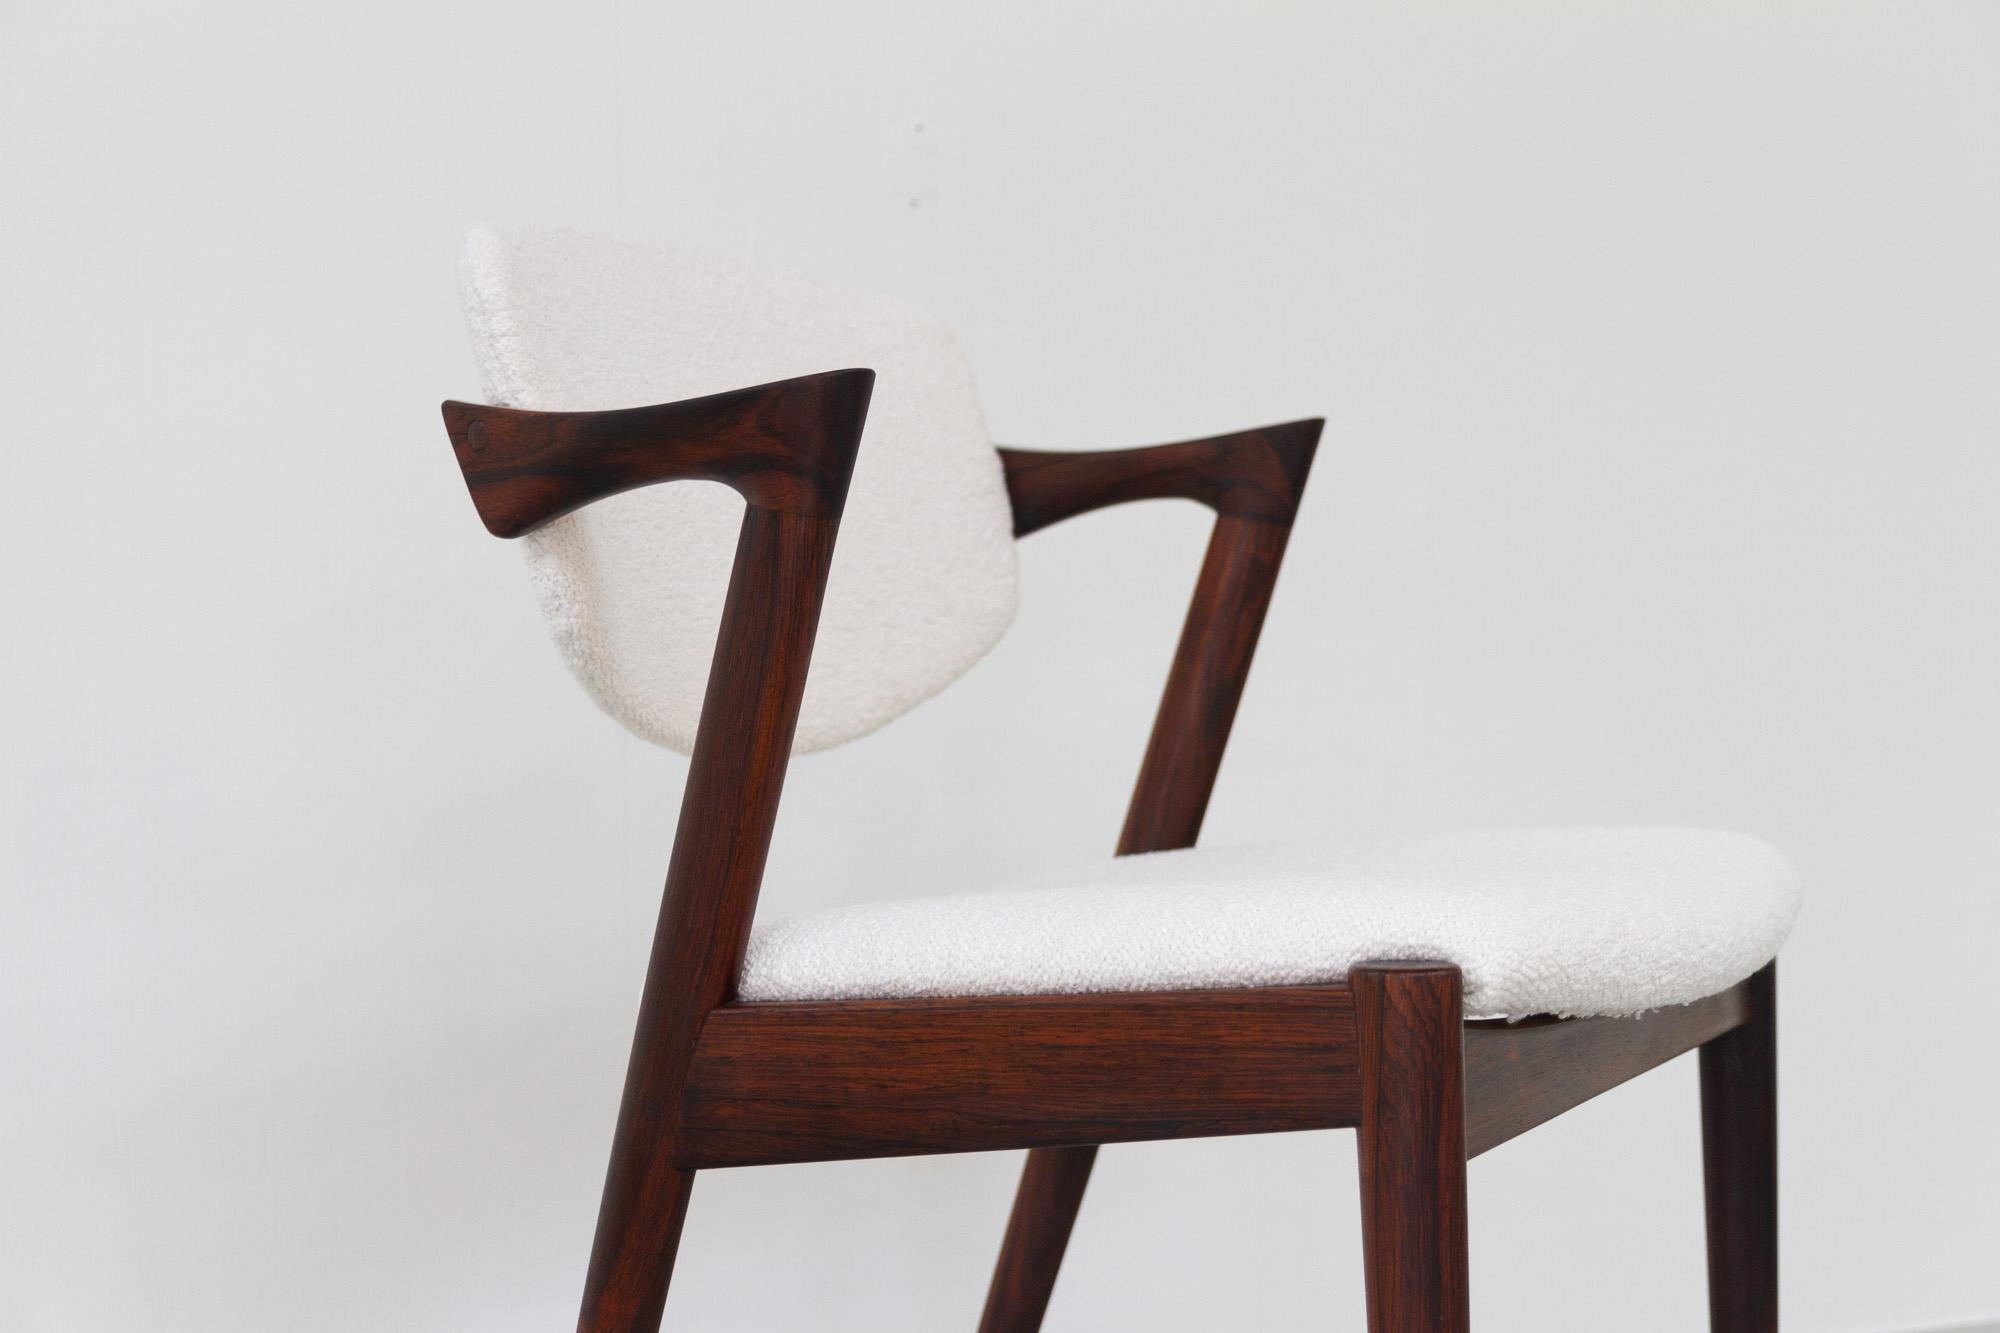 Mid-20th Century Vintage Danish Modern Rosewood Chair Model 42 by Kai Kristiansen, 1960s For Sale